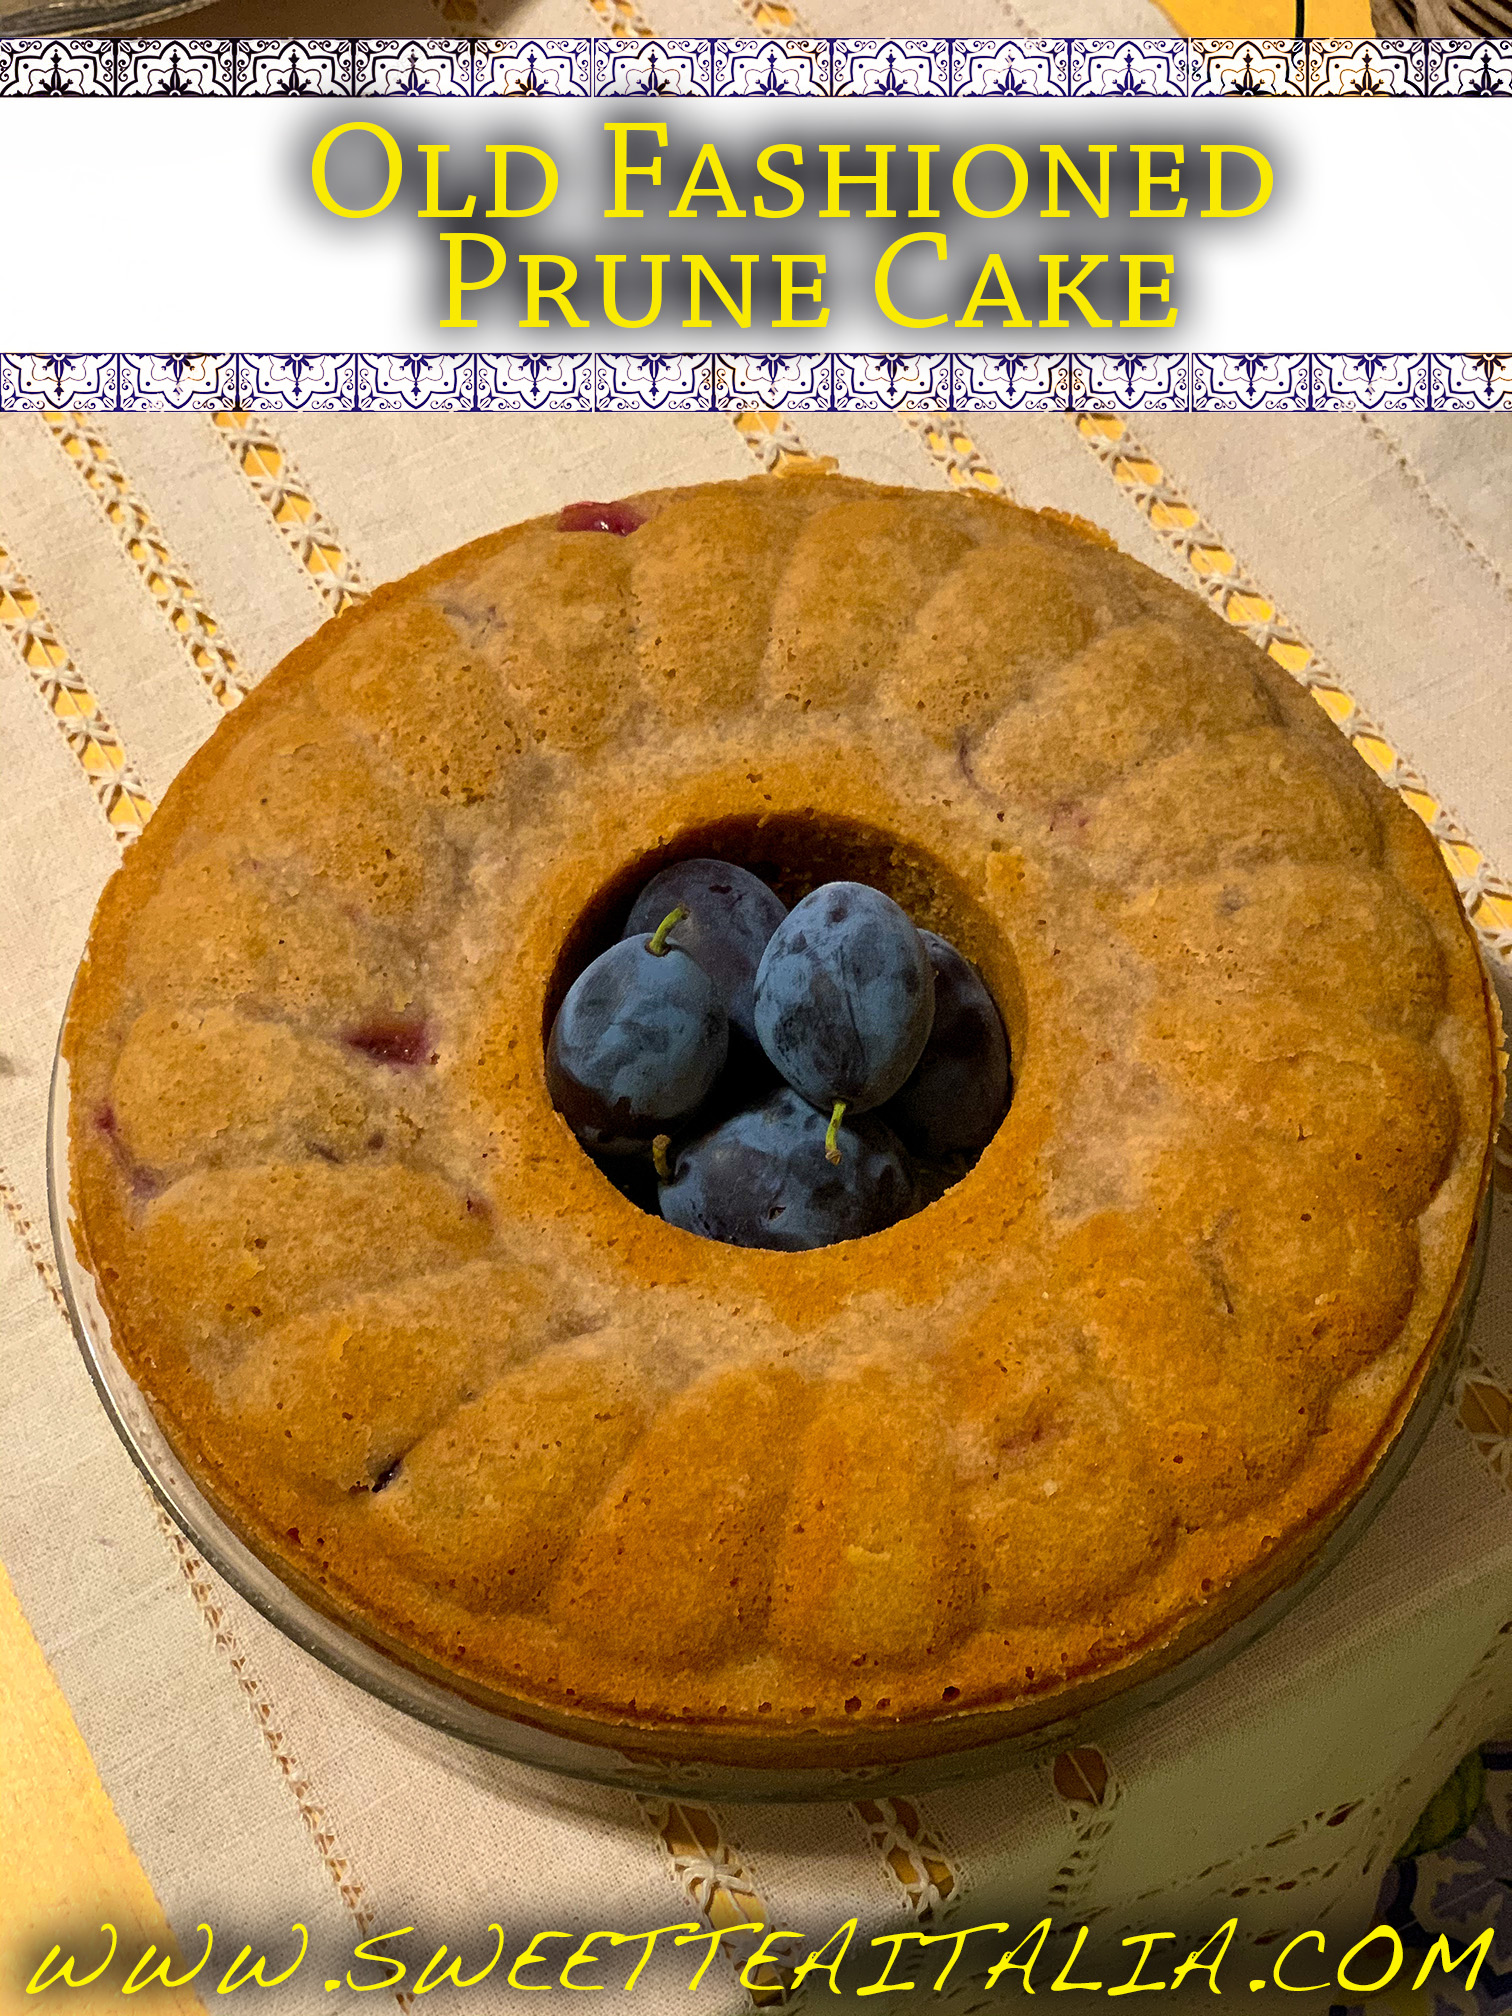 Maple Prune Cake Spiced With Ginger - Lavender and Lime